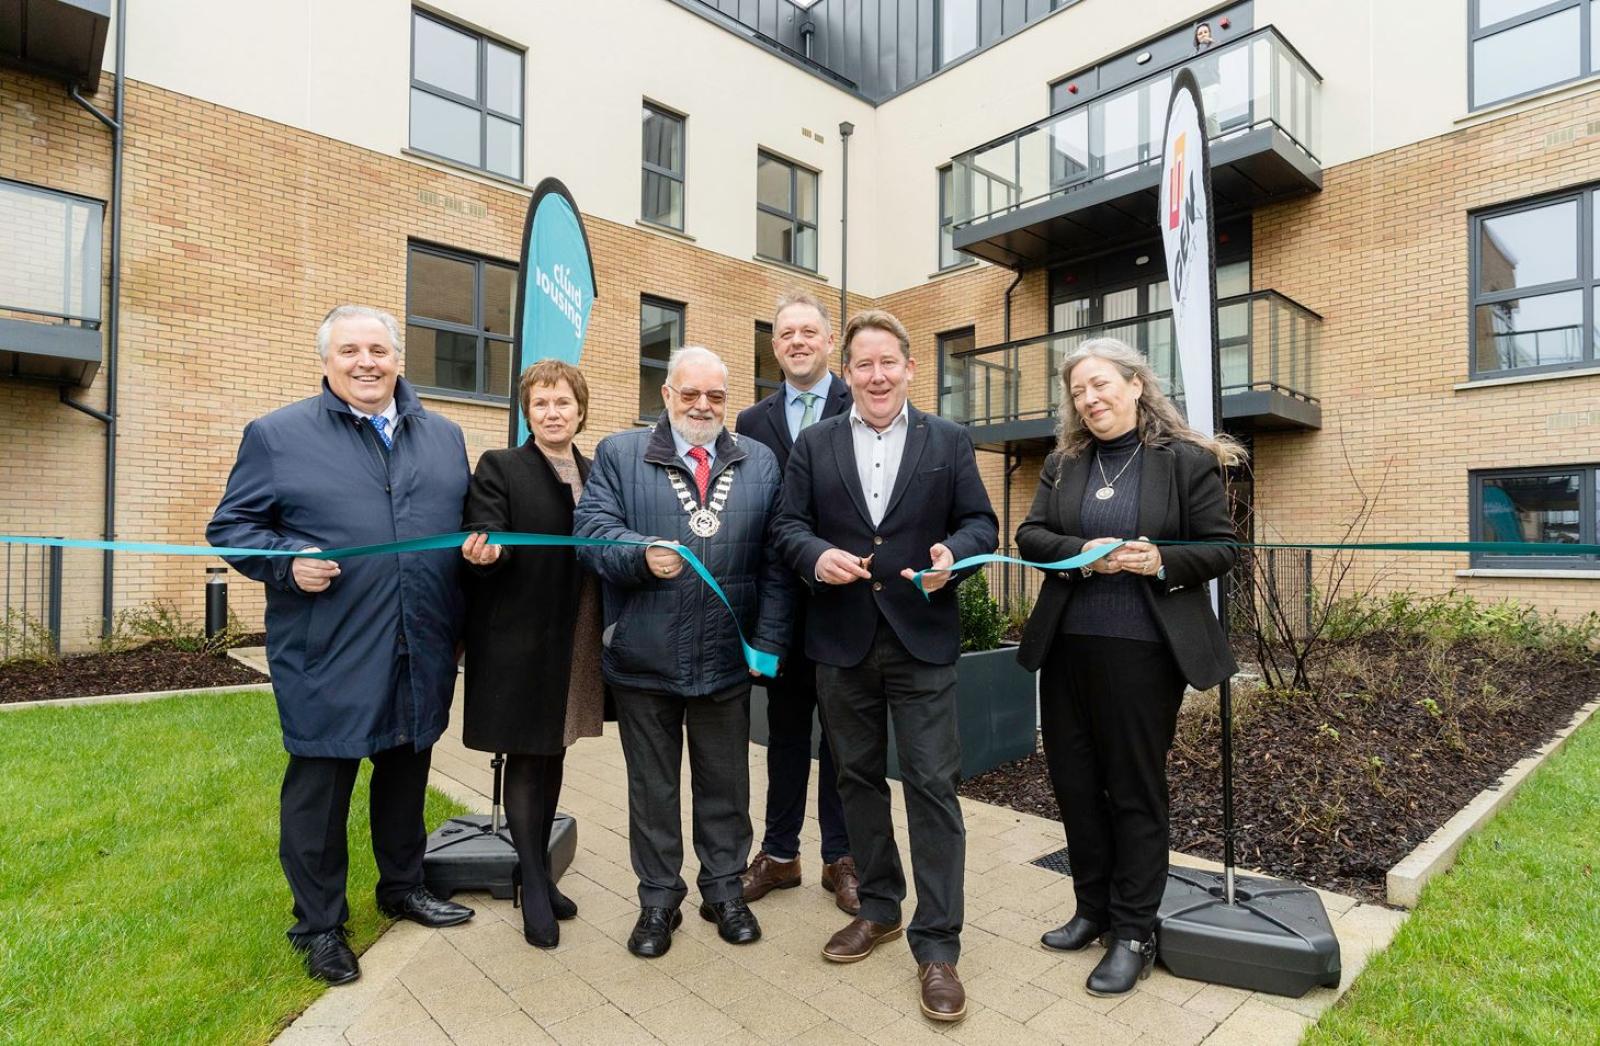 Minister O’Brien officially opens 96 new social homes at The Willows, Dunshaughlin, Co. Meath